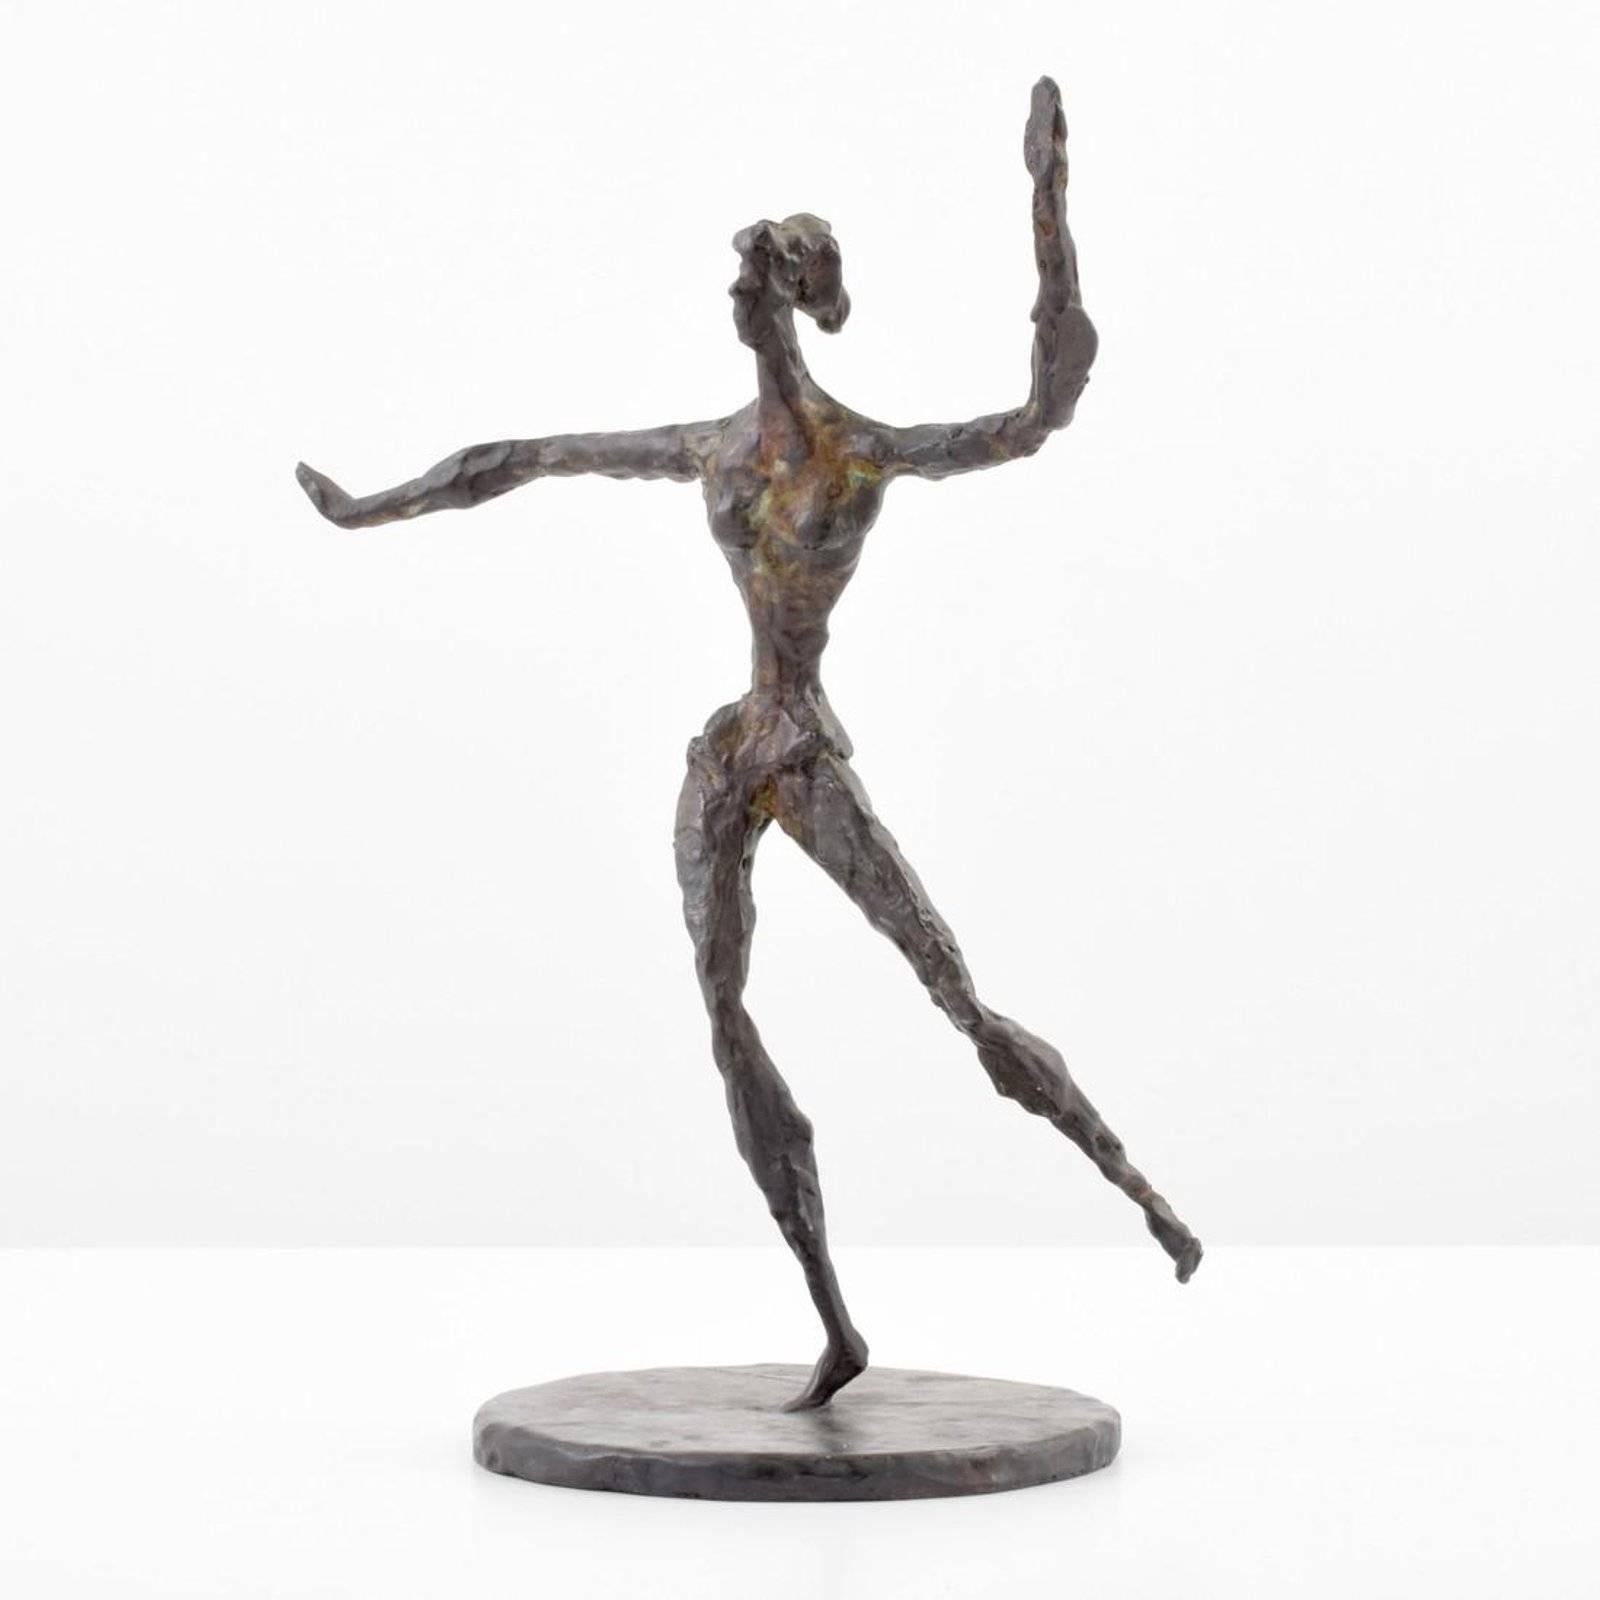 Bronze sculpture by Chaim Gross (1904-1991). Provenance, acquired from the artist by Leonard L. Farber (died 2005) of Fort Lauderdale, by whom bequeathed to Antje Langniss Farber (died 2017) of Palm Beach and Nantucket, from whose estate bequeathed